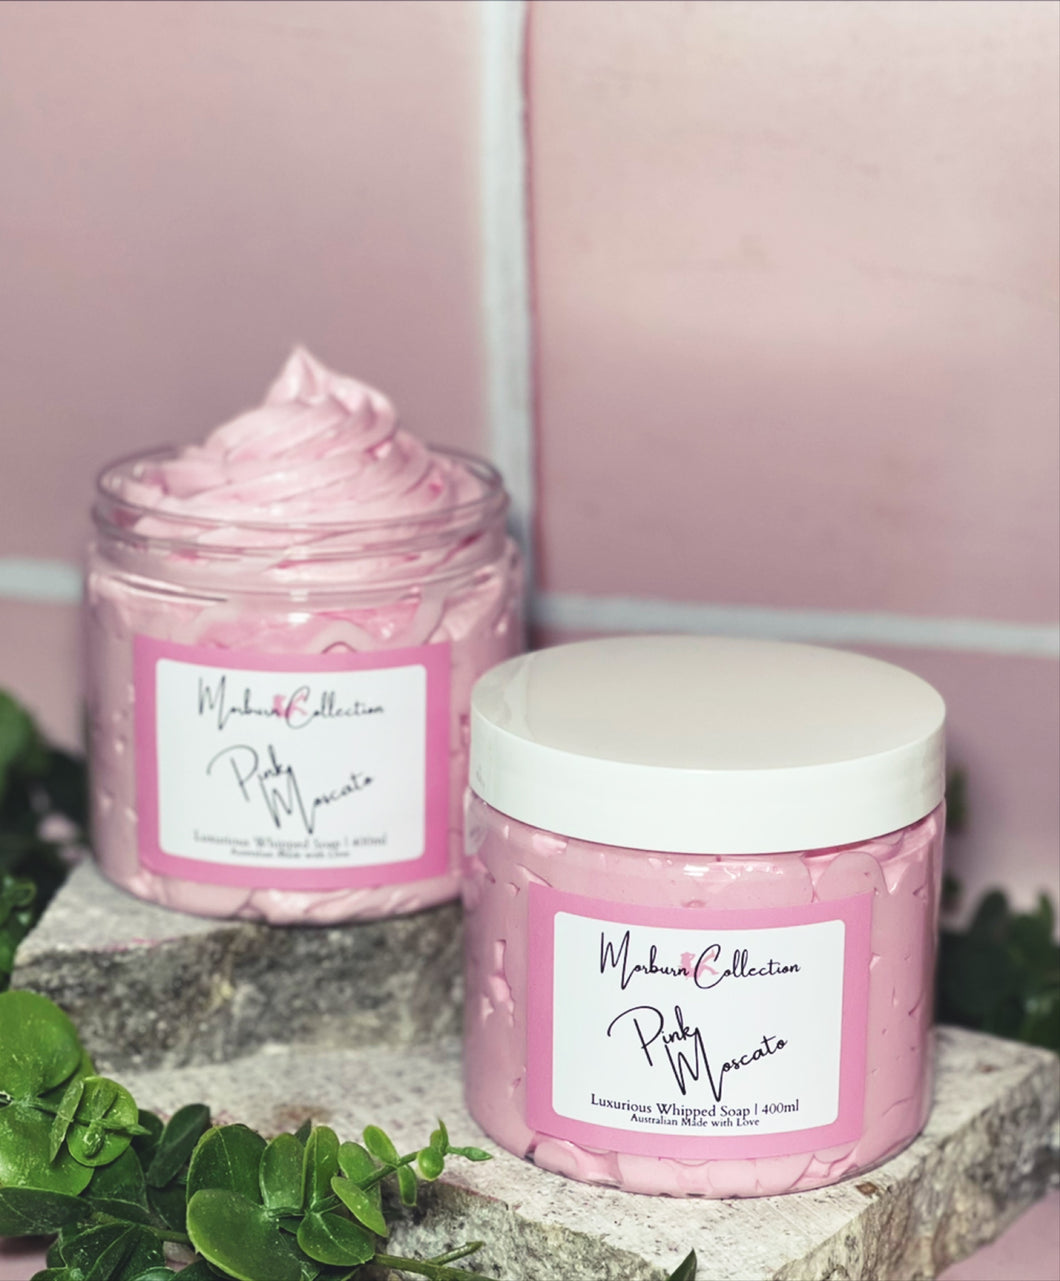 Pink Moscato Whipped Soap